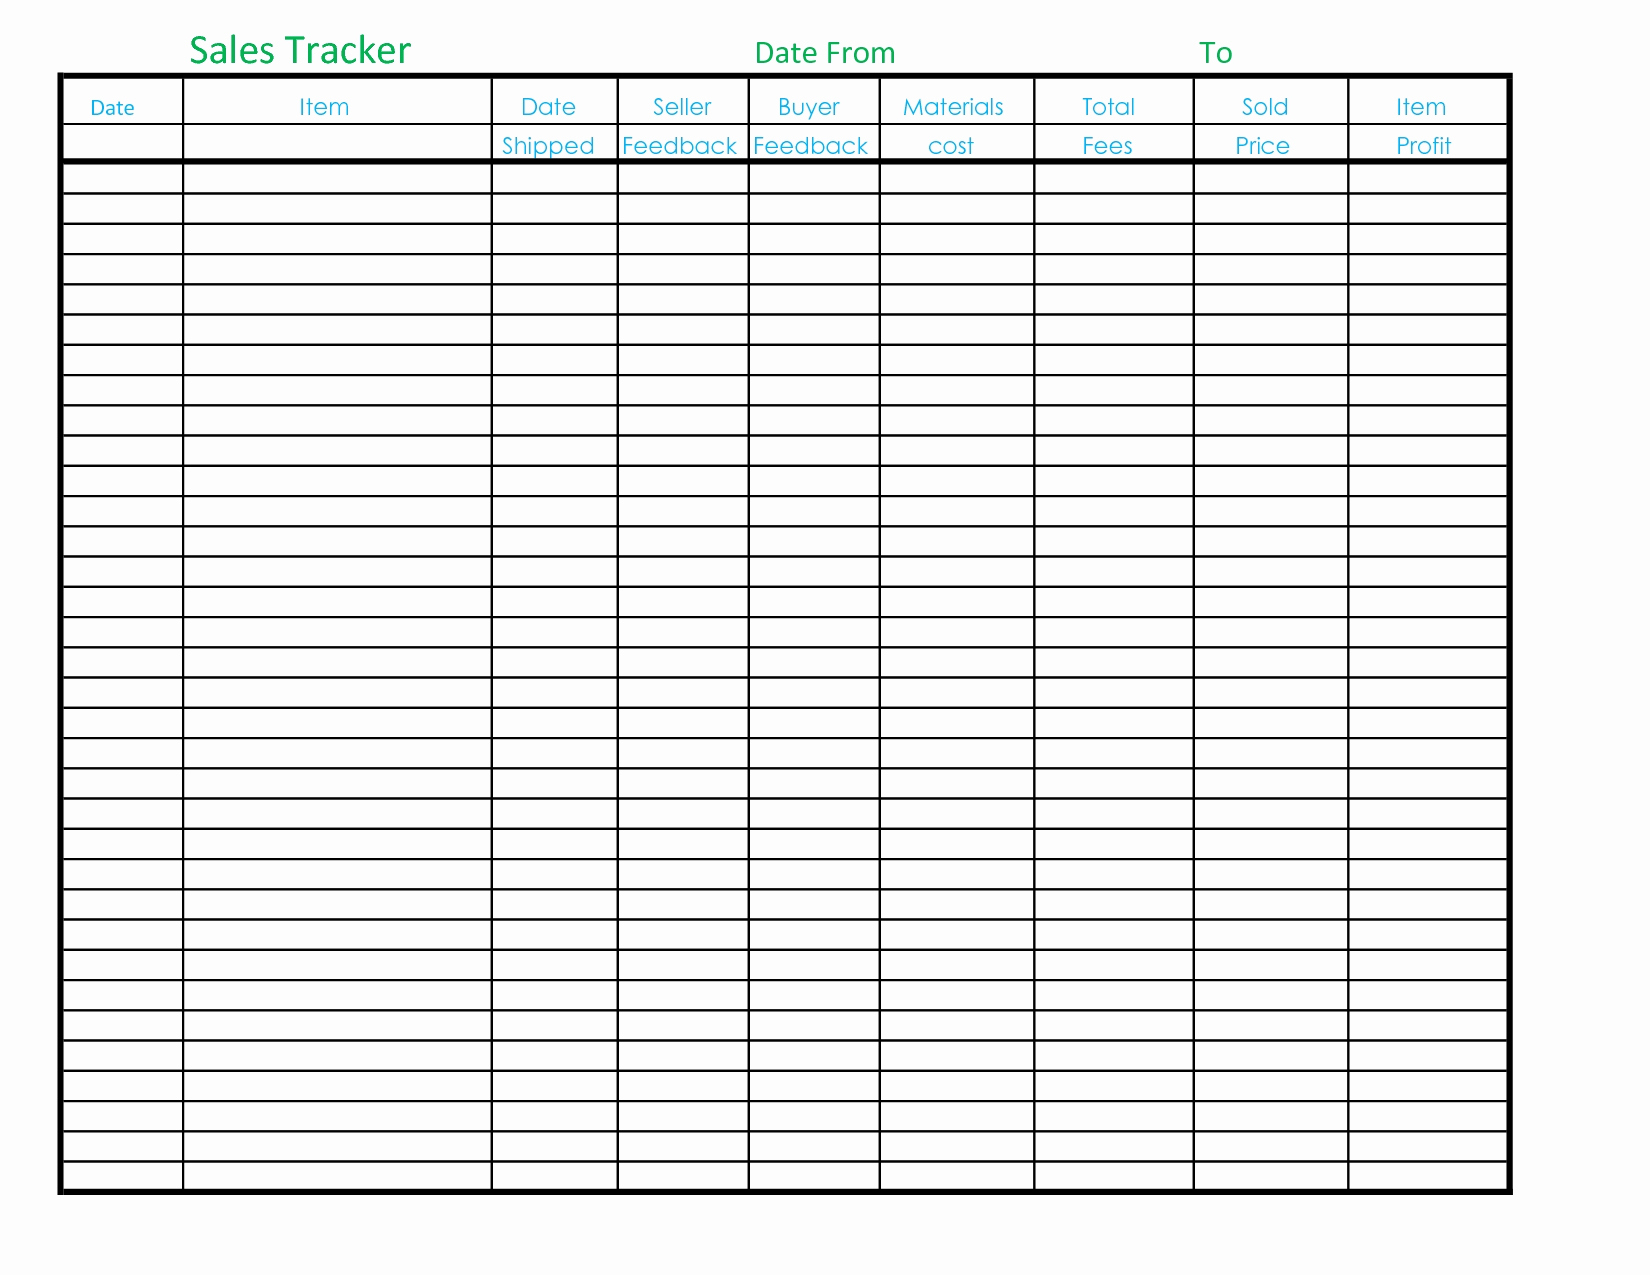 Quote Tracking Spreadsheet Fresh Insurance Sales Tracking for Insurance Sales Tracking Spreadsheet